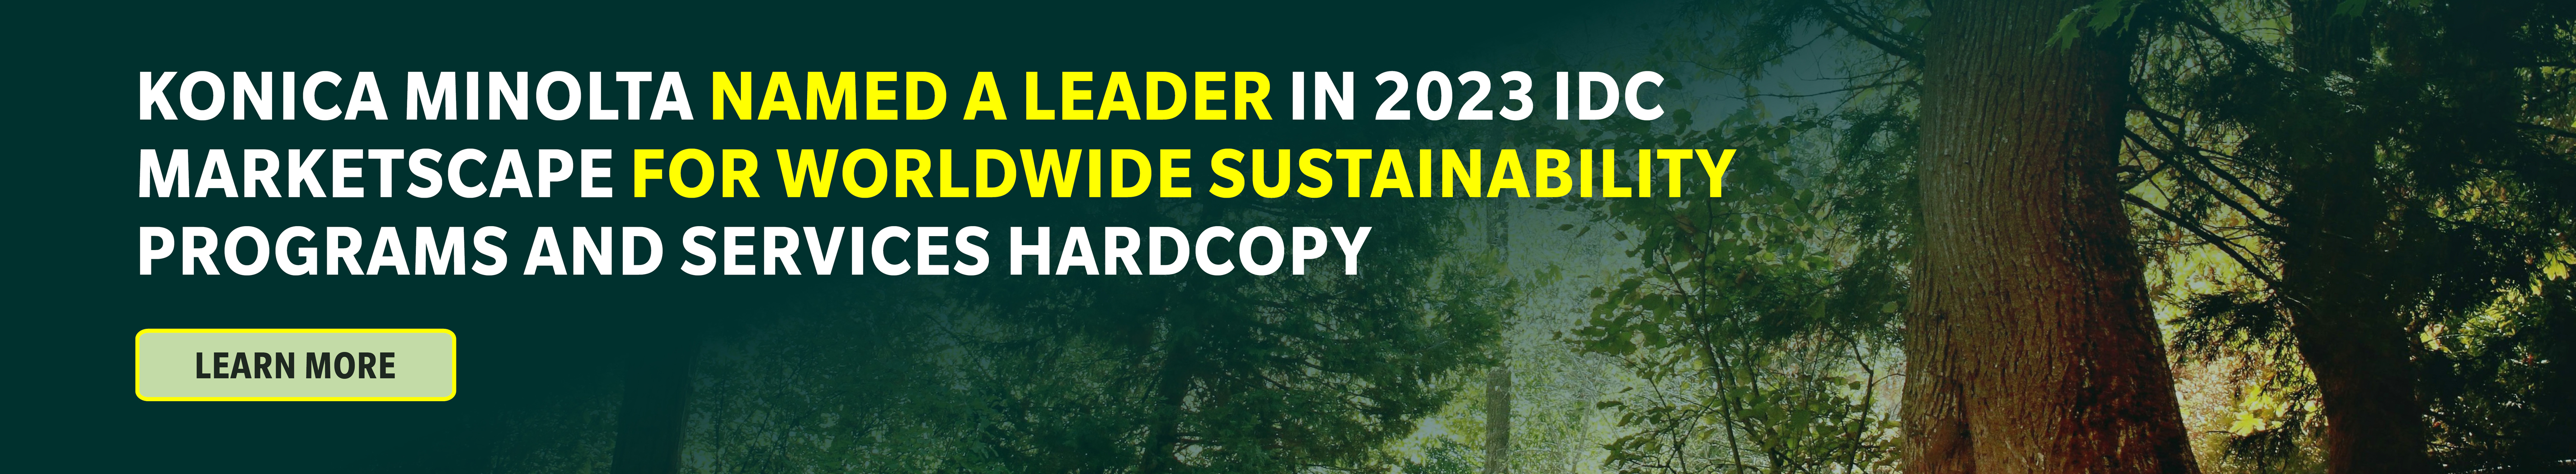 Konica Minolta Named a ‘Leader’ in 2023 IDC MarketScape for Worldwide Sustainability Programs and Services Hardcopy